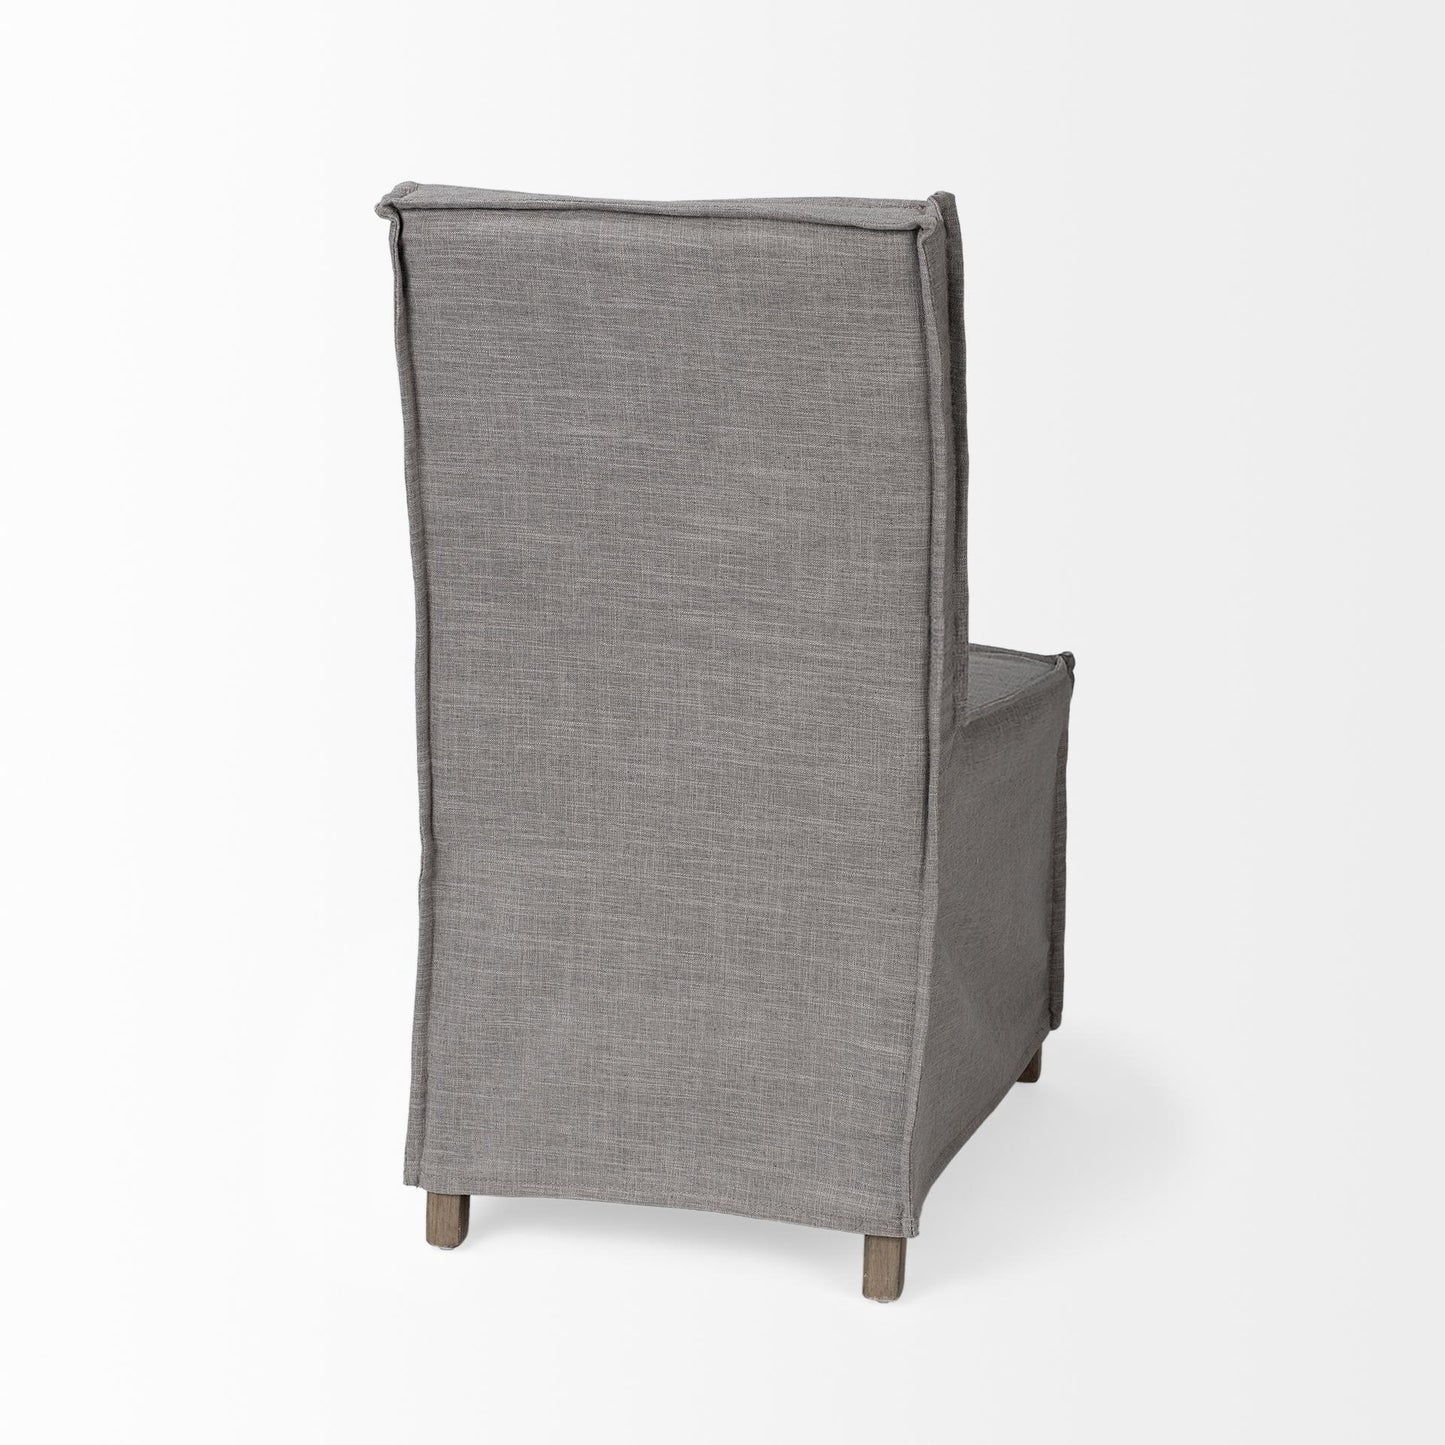 Elbert I Grey Fabric Slip-Cover Brown Wooden Base Dining Chair